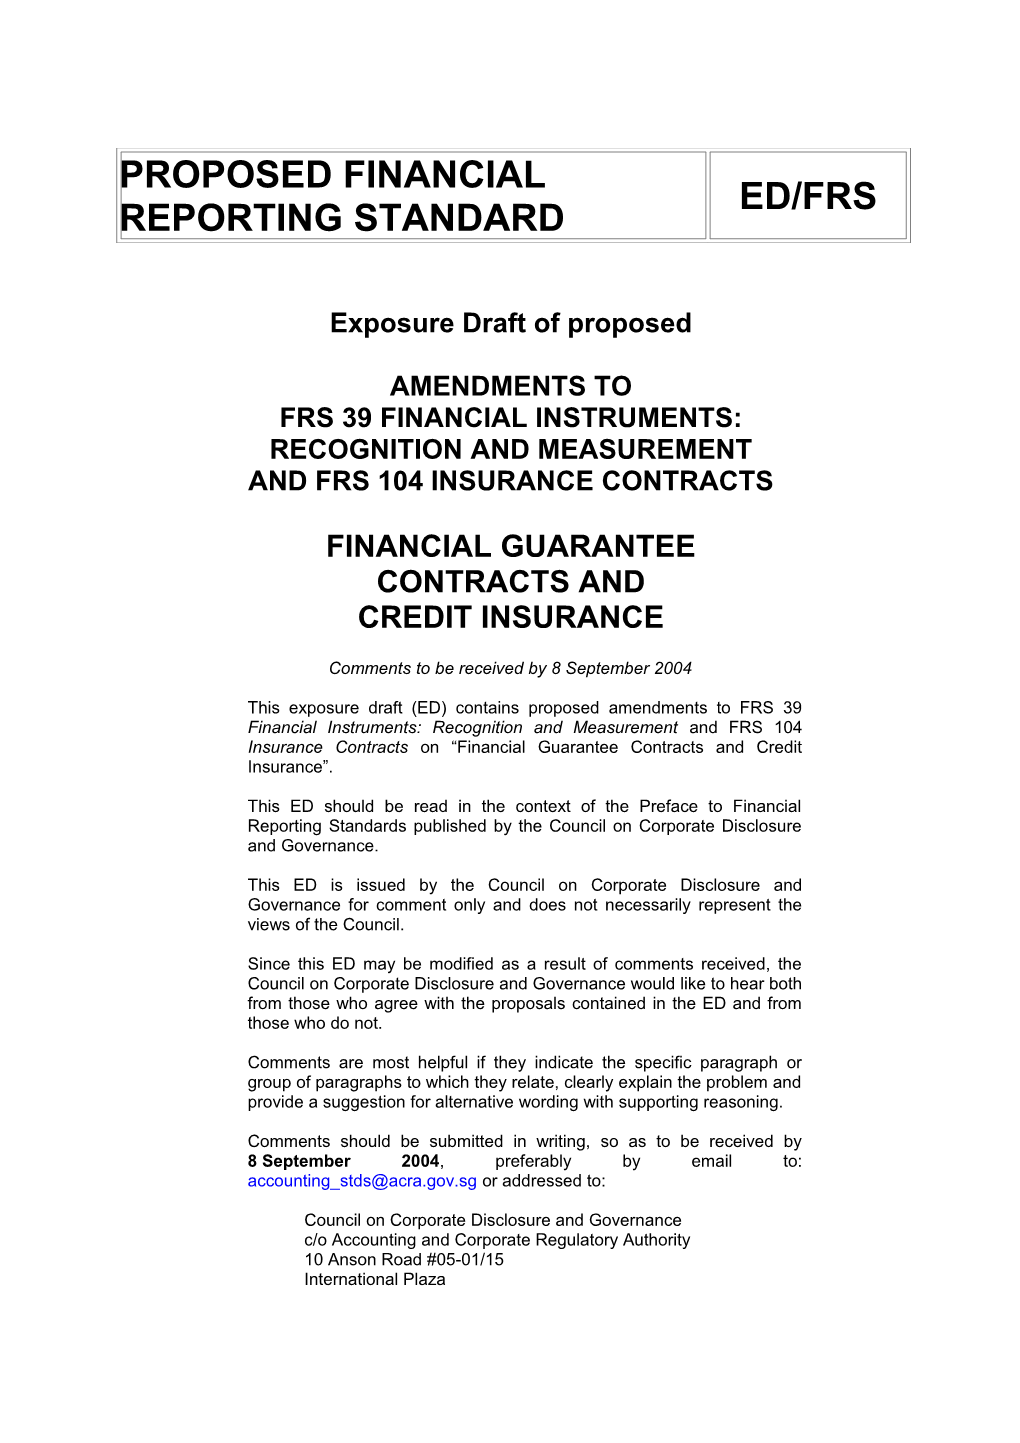 ED Amendments to FRS 39 - Financial Guarantee Contracts and Credit Insurance